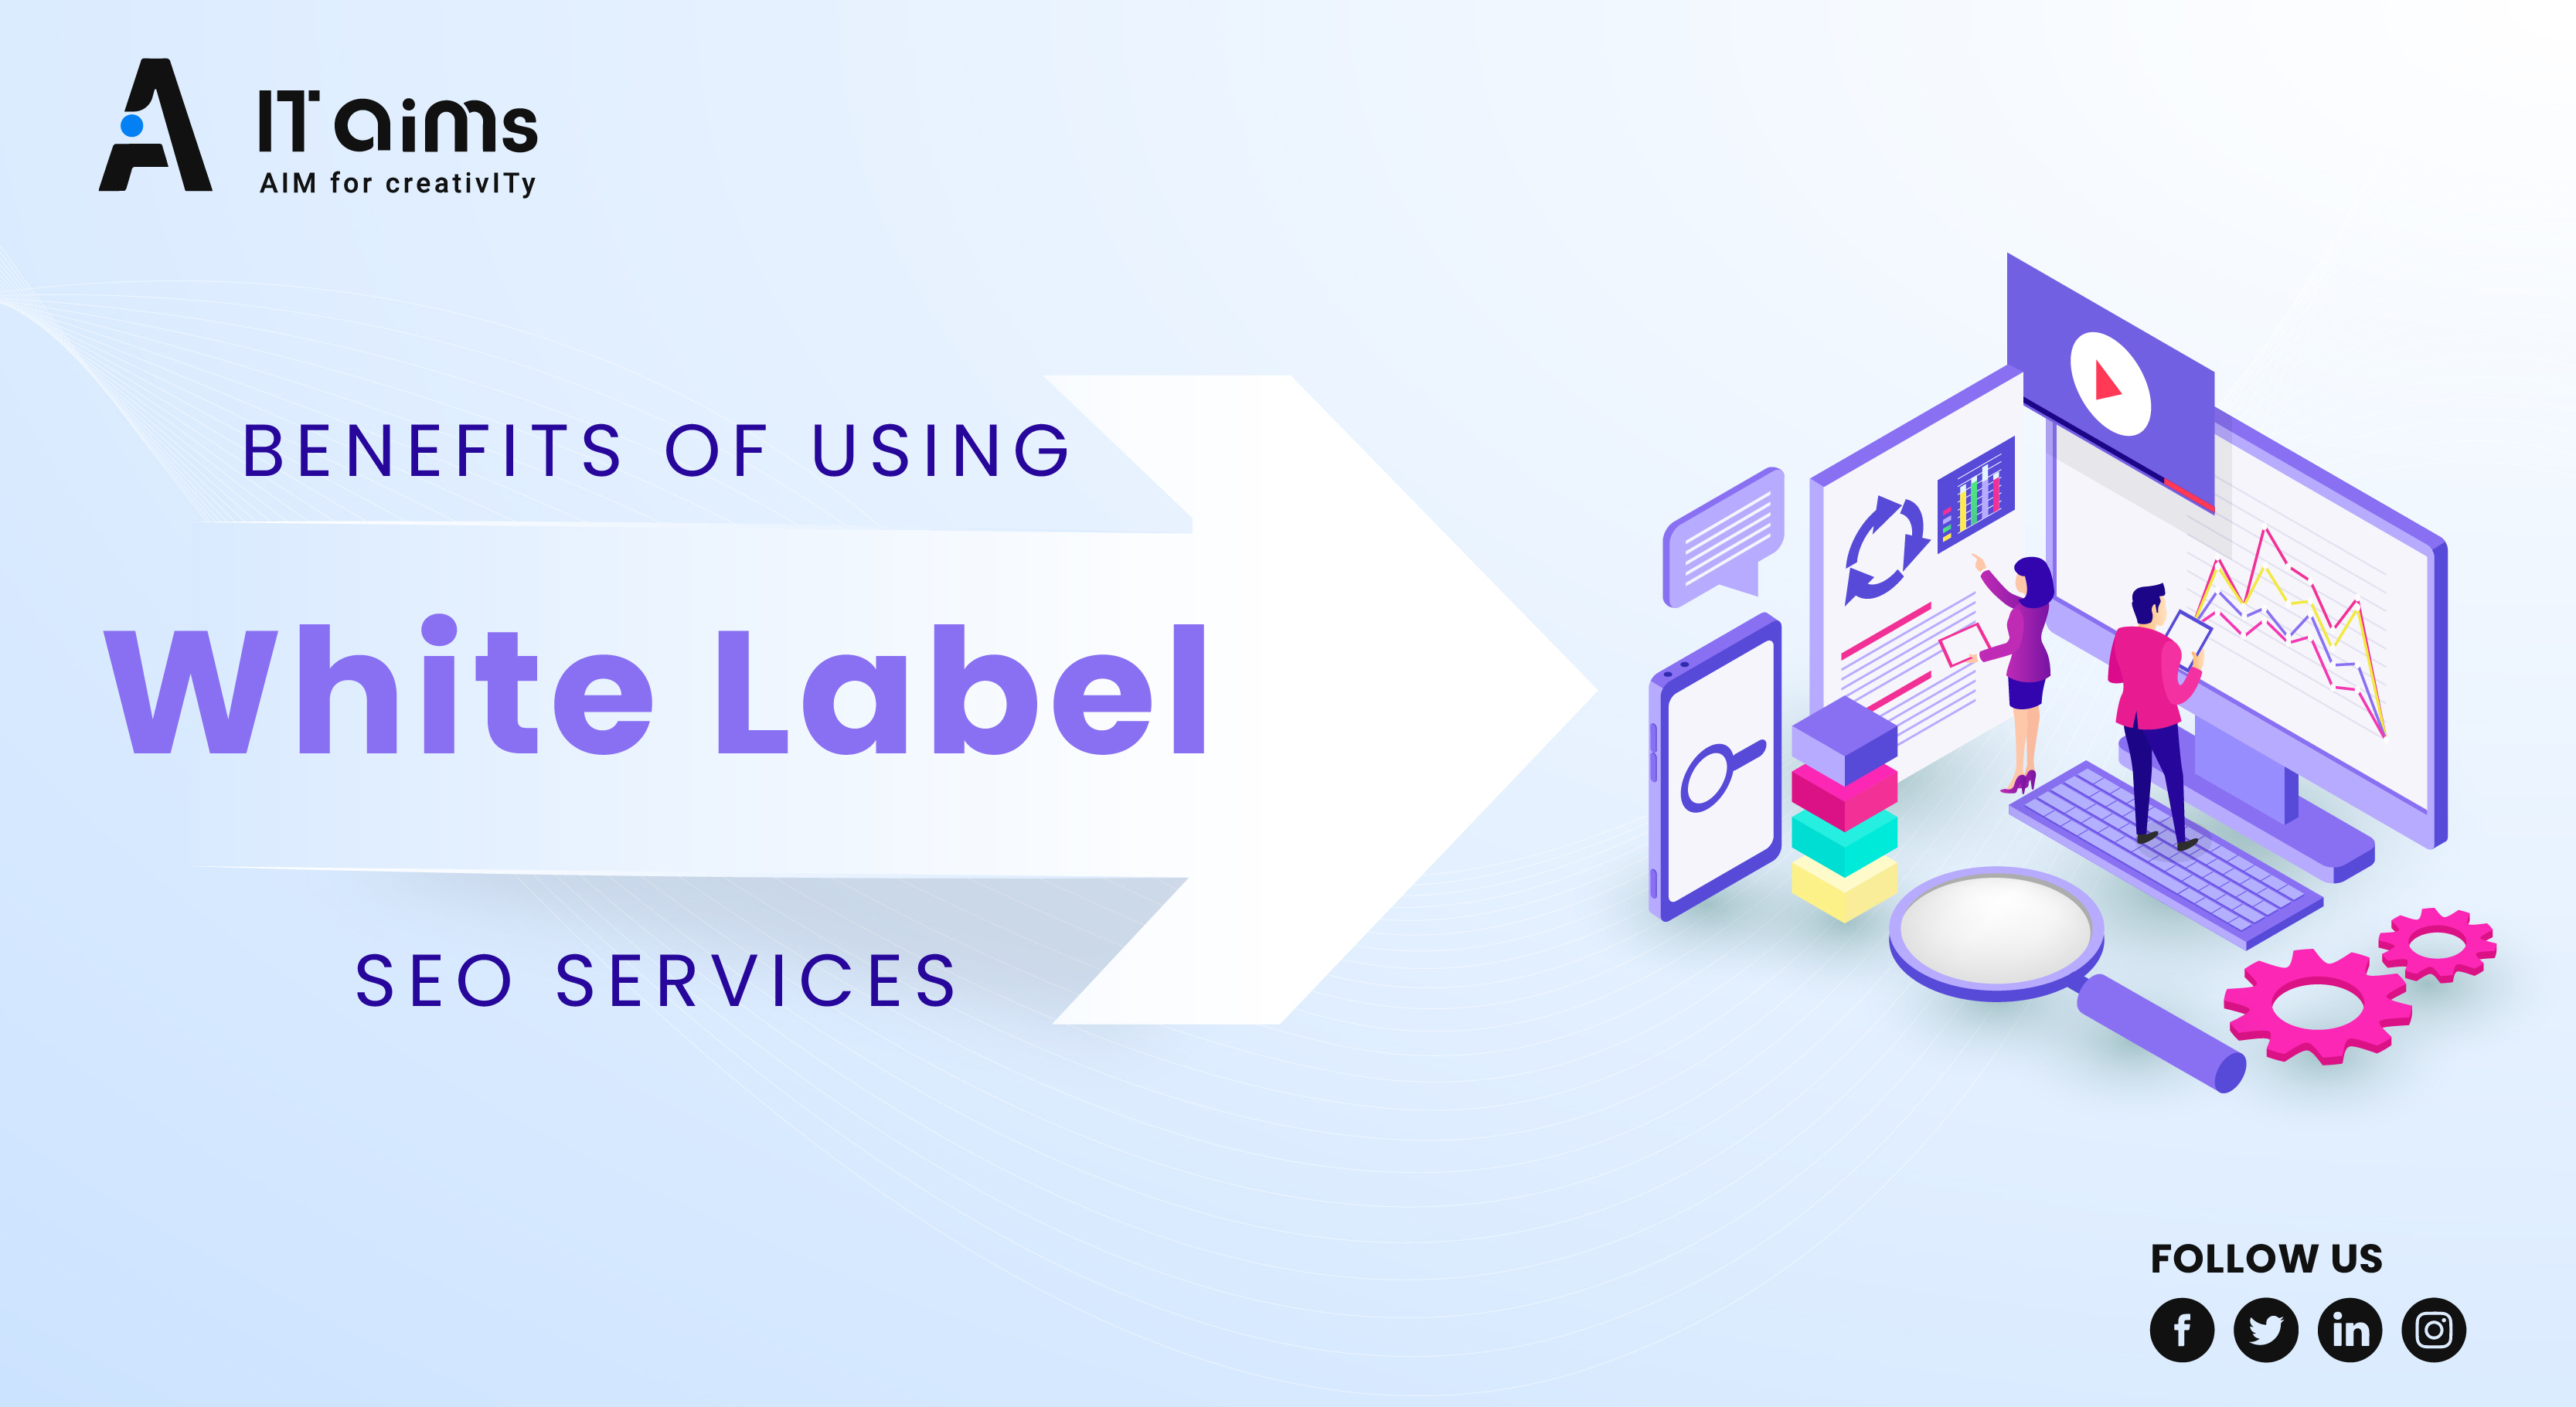 5 Benefits of White Label SEO Services